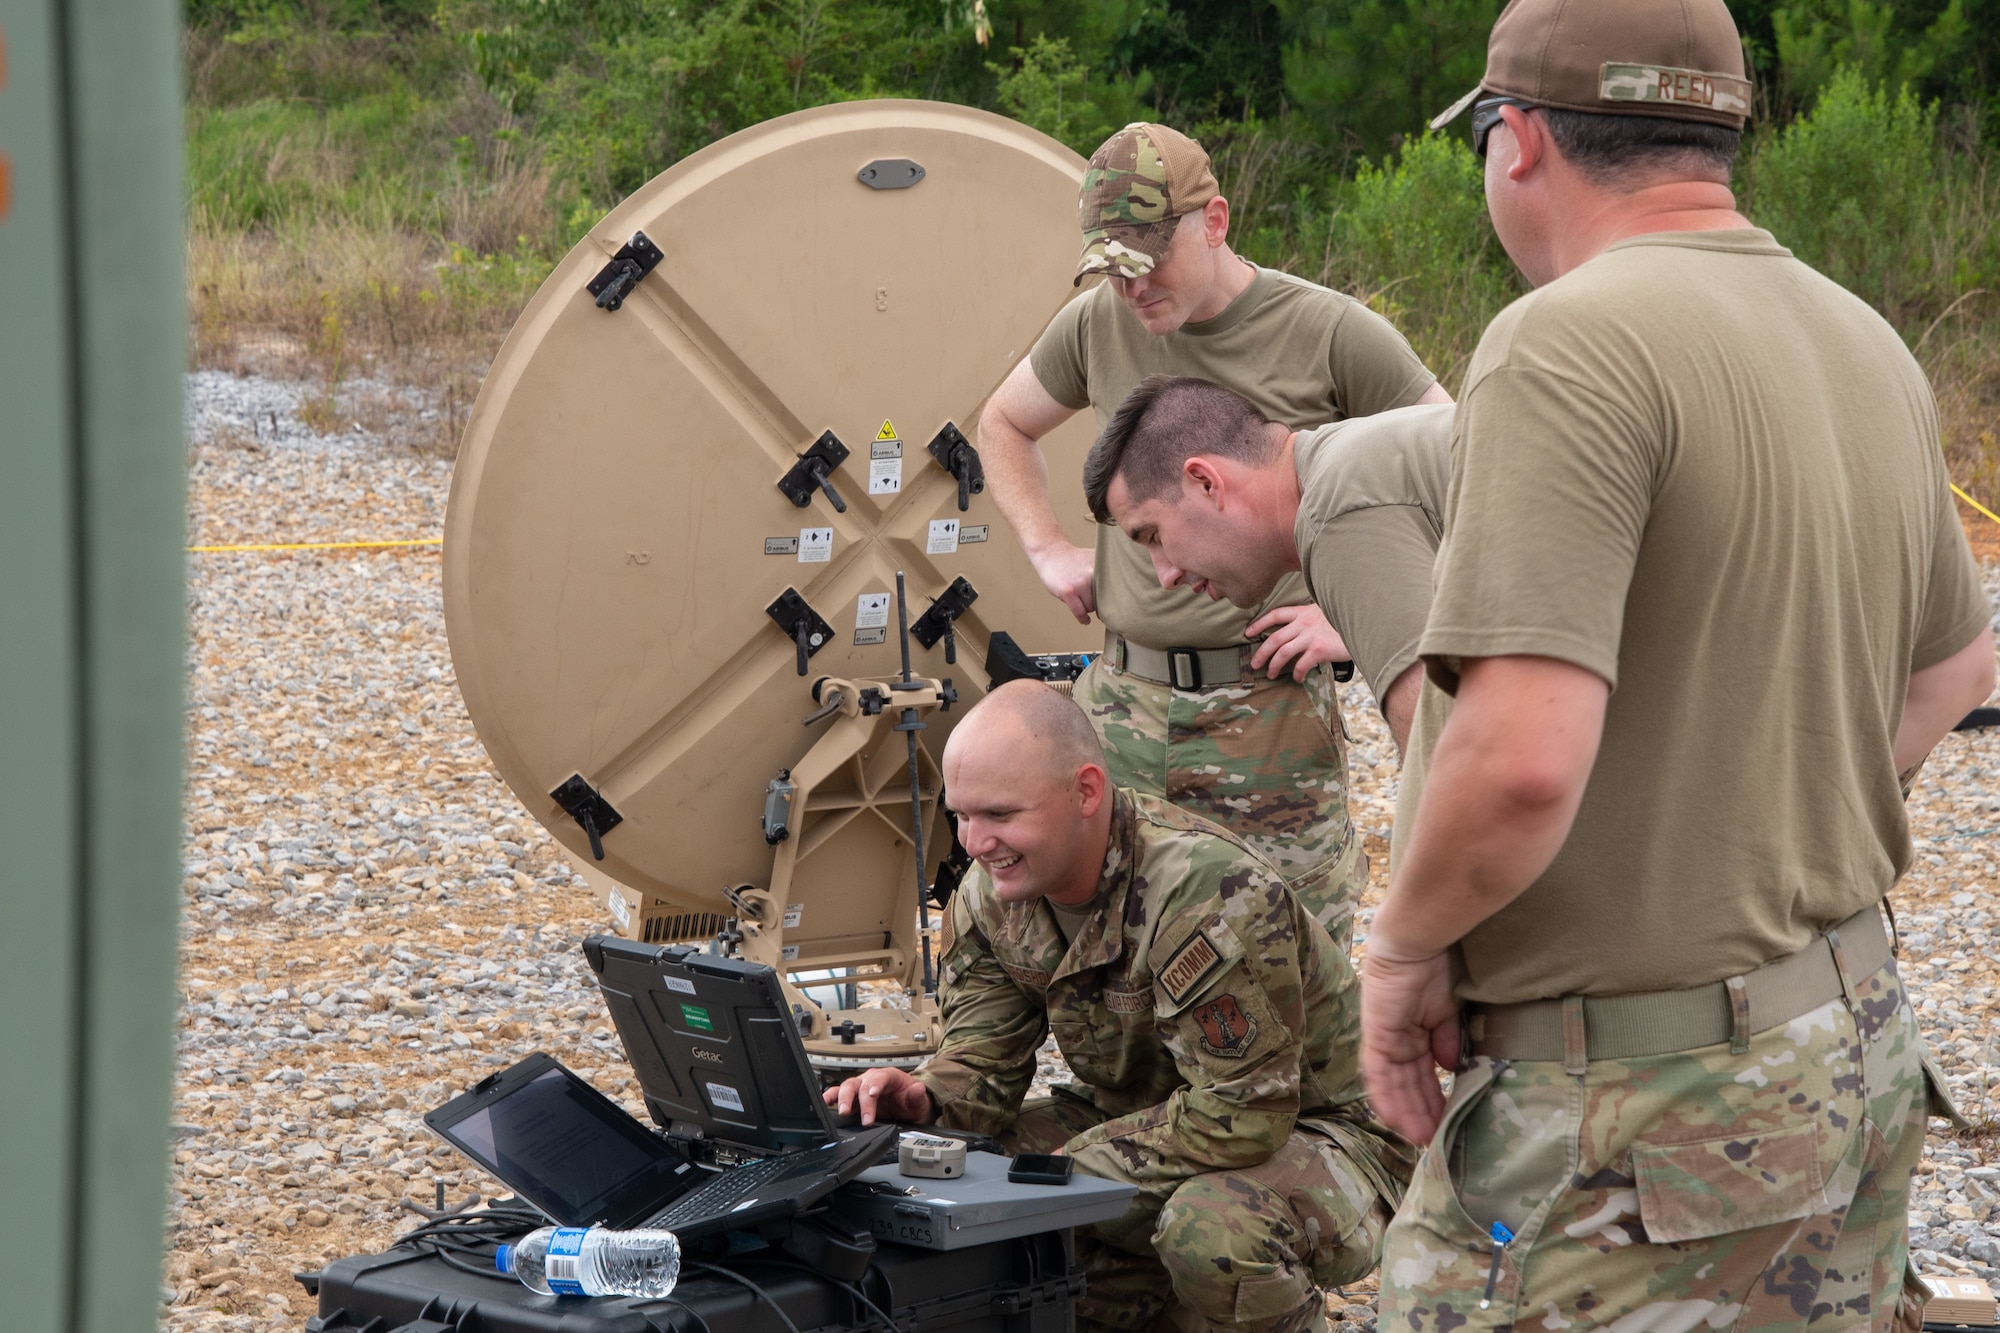 Members of the 239th Combat Communications Squadron ready a satellite communications terminal for use during Exercise BUMBU 22 at Camp Shelby, Miss., June 3, 2022. BUMBU 22 brings five combat communications squadrons with the 254th Combat Communications Group from their home stations located across the nation together for a consolidated training exercise. (U.S. Air National Guard photo by Staff Sgt. Adrian Brakeley)